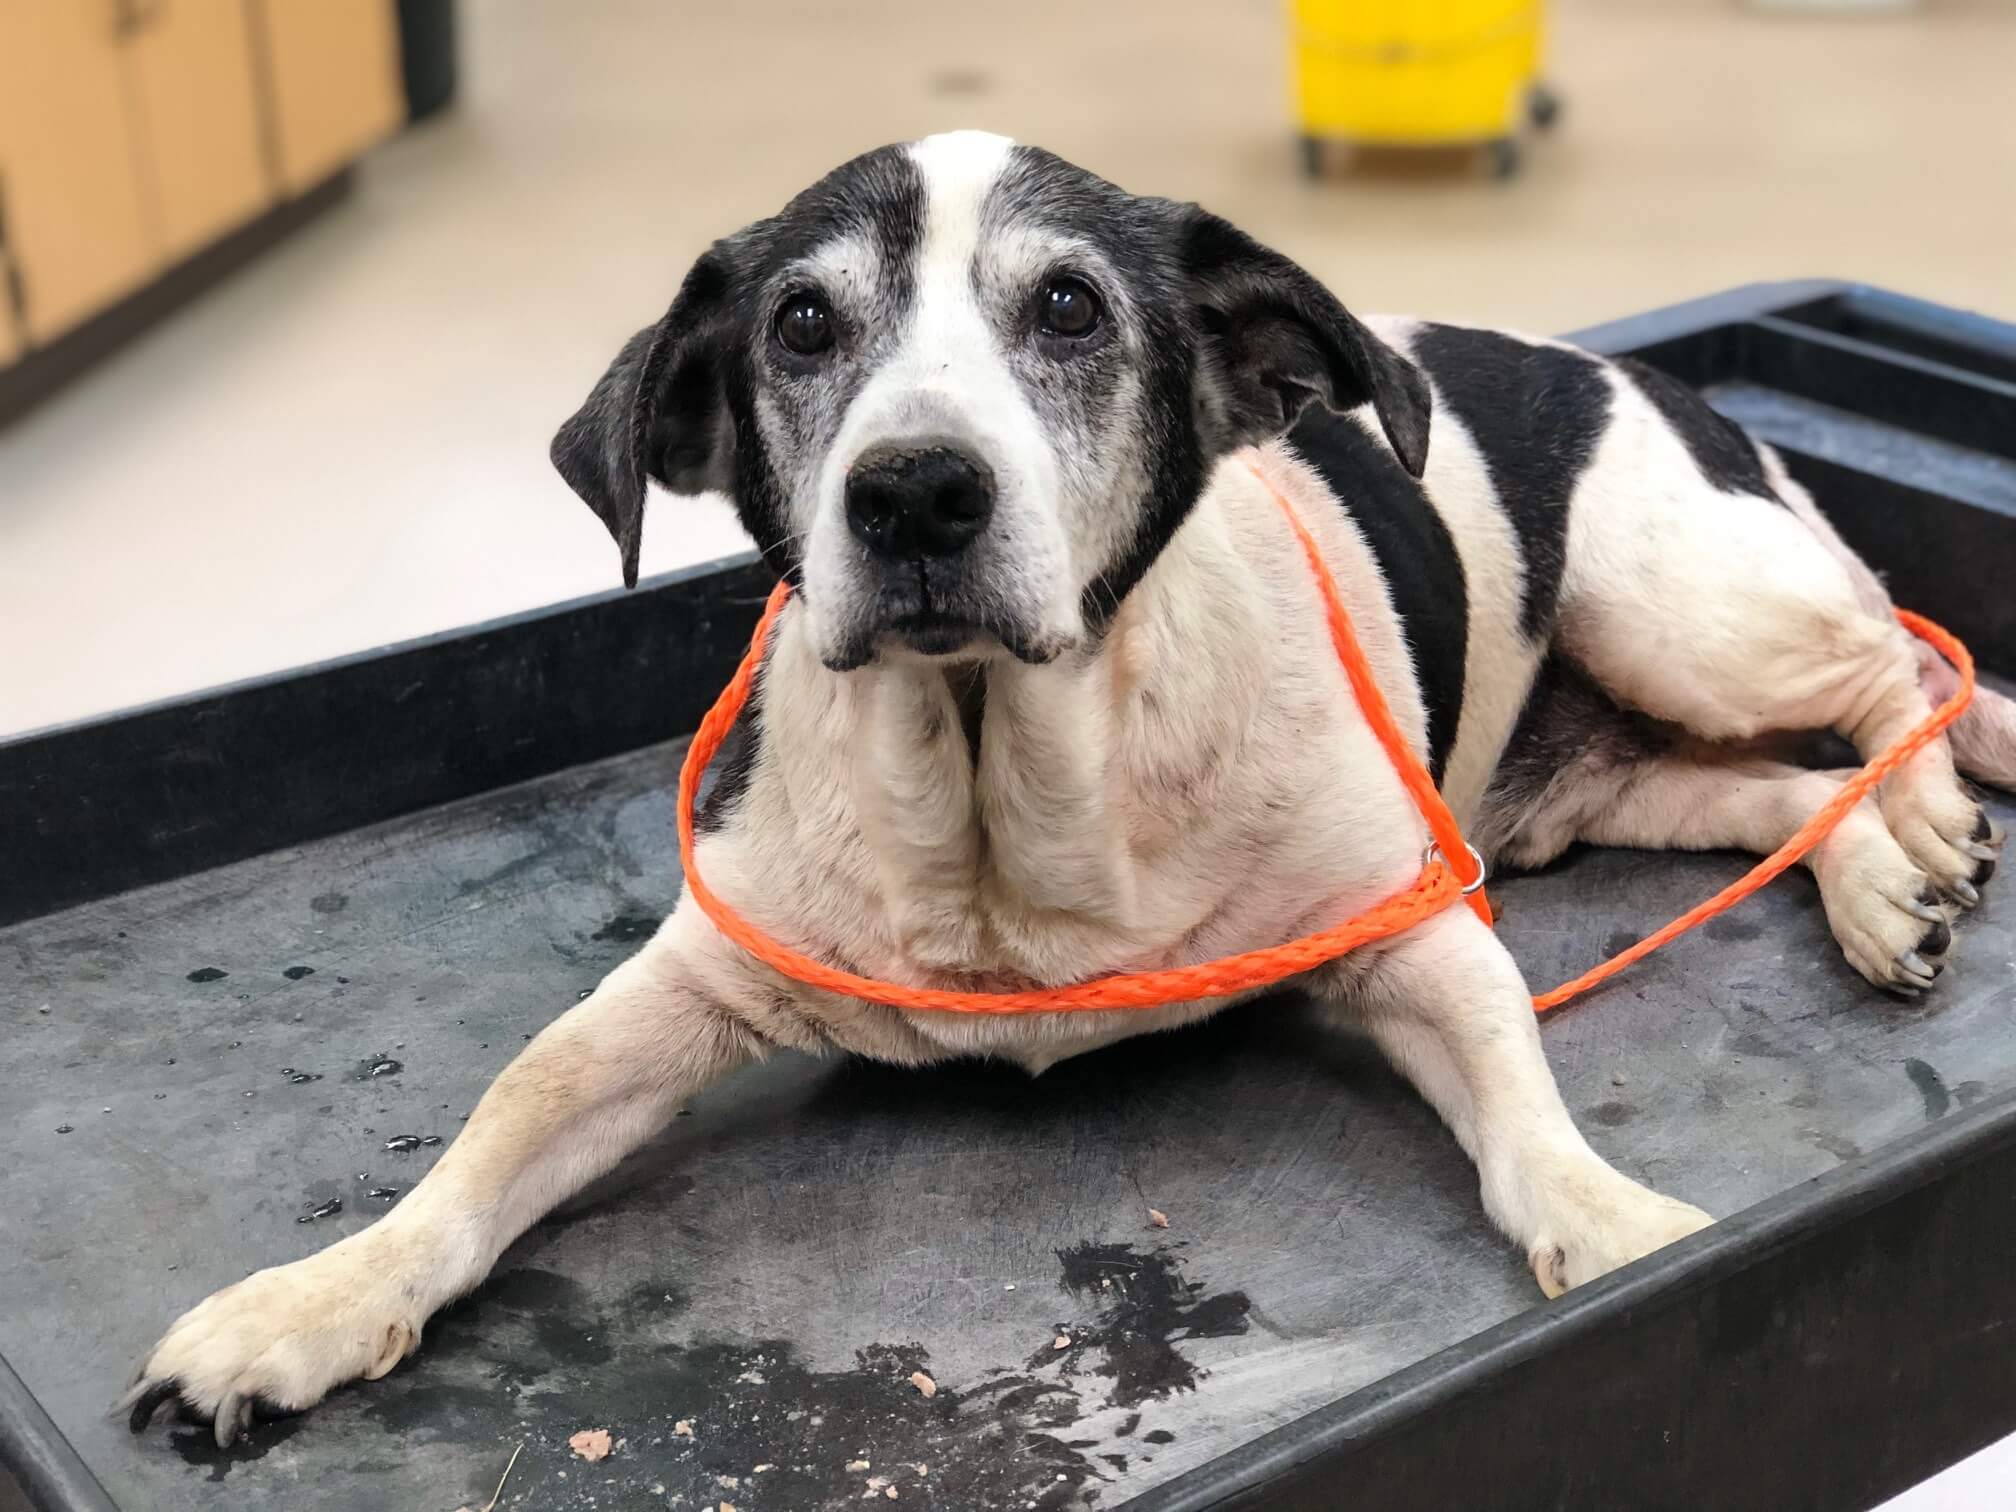 Rescue needed for sweet senior dog who can't walk